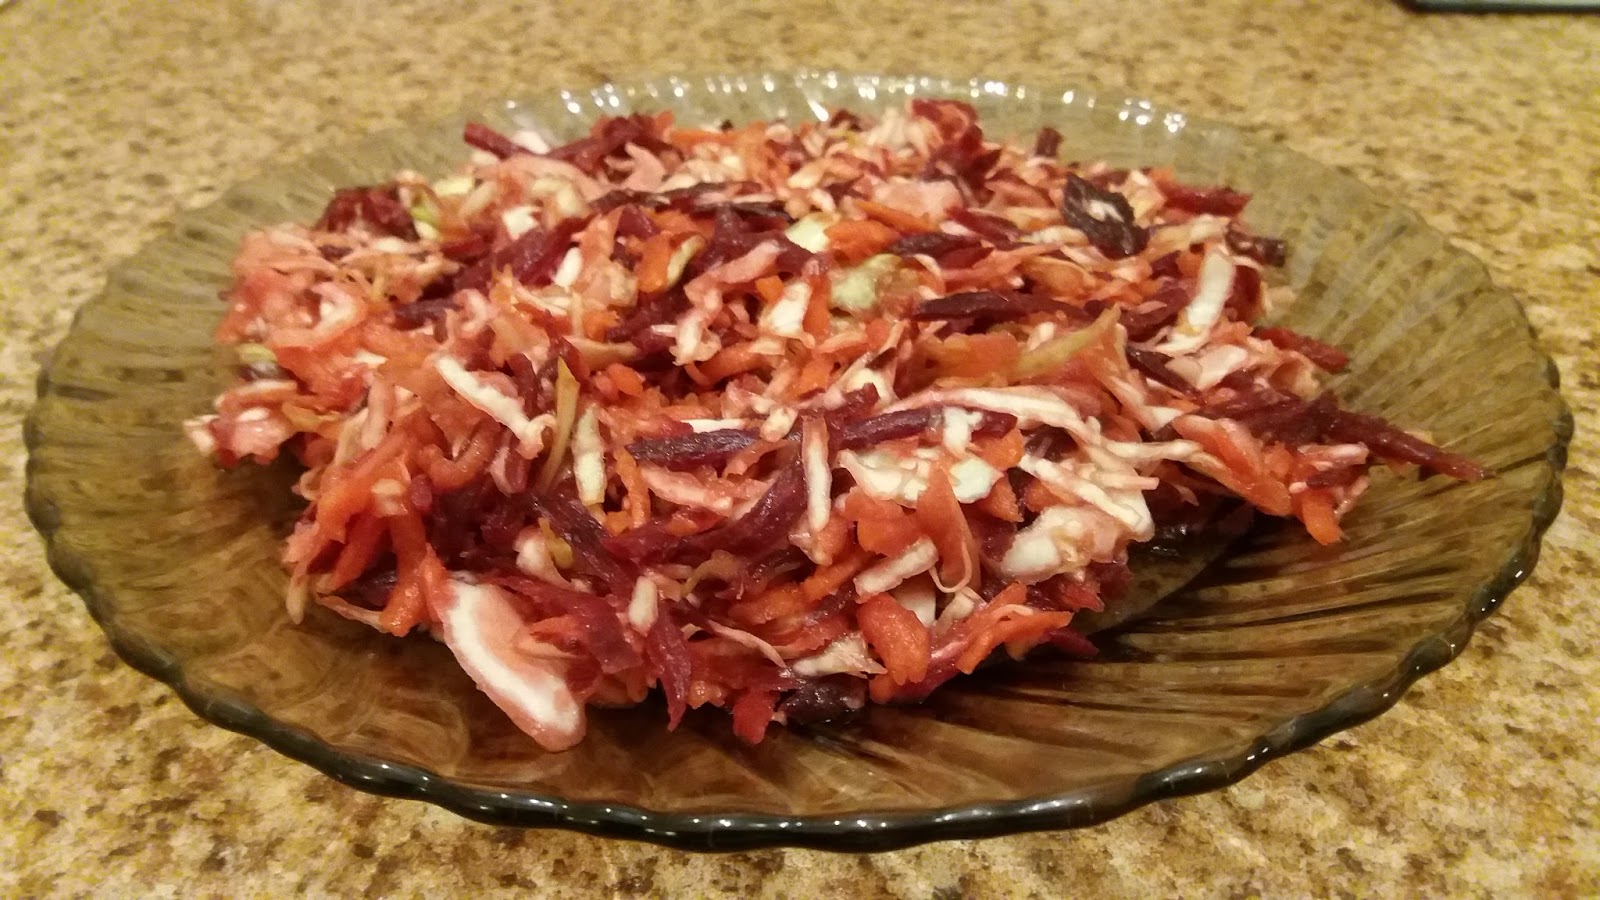 SALAD WITH CABBAGE, CARROTS AND BEETS